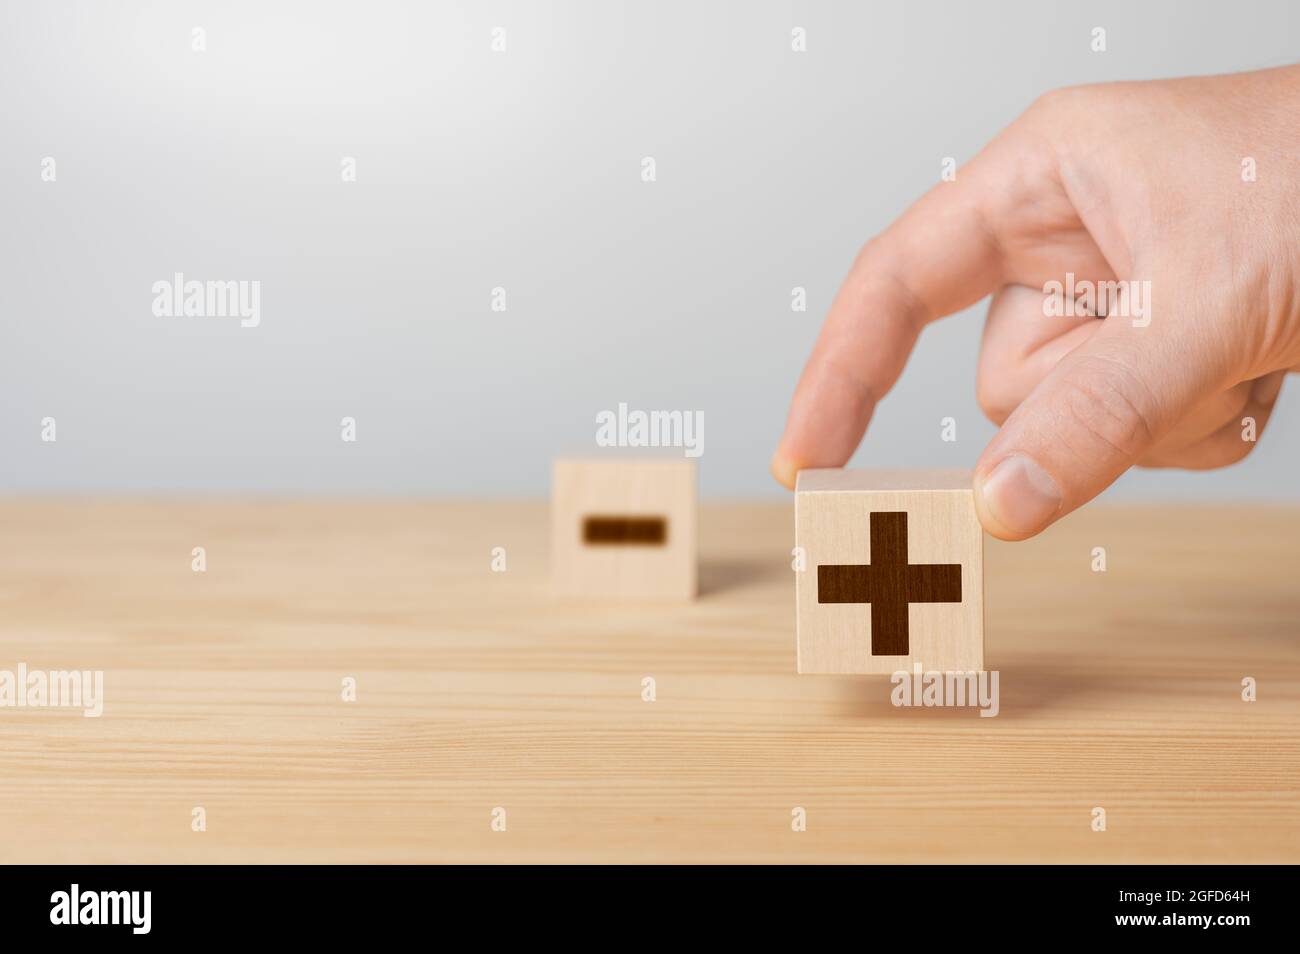 Wooden cubes with the image of pros versus cons. Plus or minus. Businessman holds a cubes with plus icon. Wooden cube with minus icon. wooden cubes wi Stock Photo